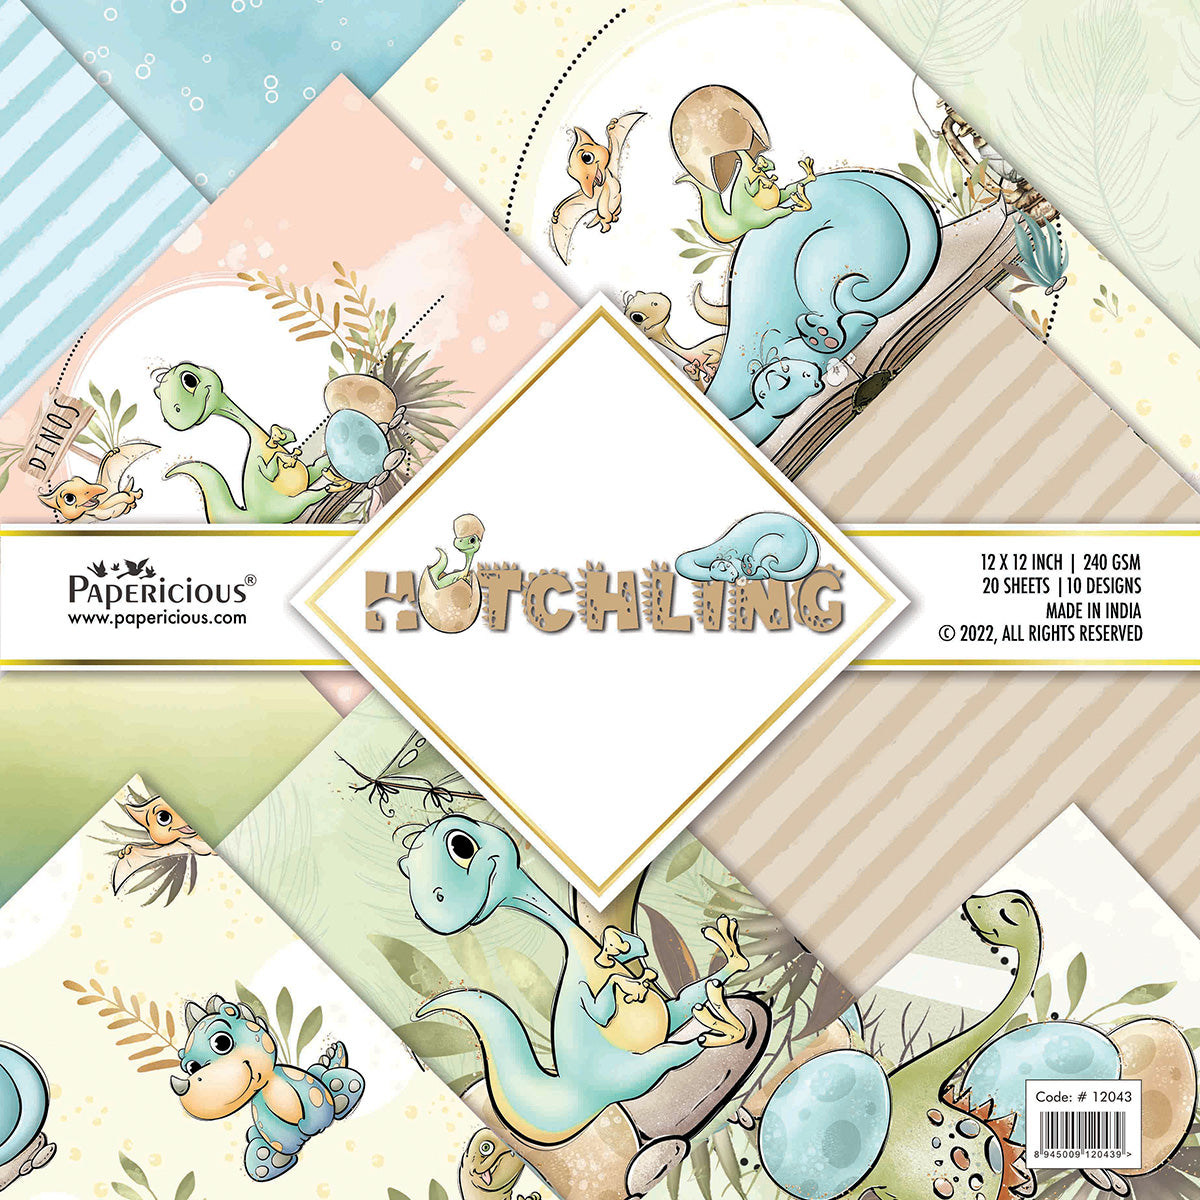 PAPERICIOUS - Hatchling -  Designer Pattern Printed Scrapbook Papers 12x12 inch  / 20 sheets